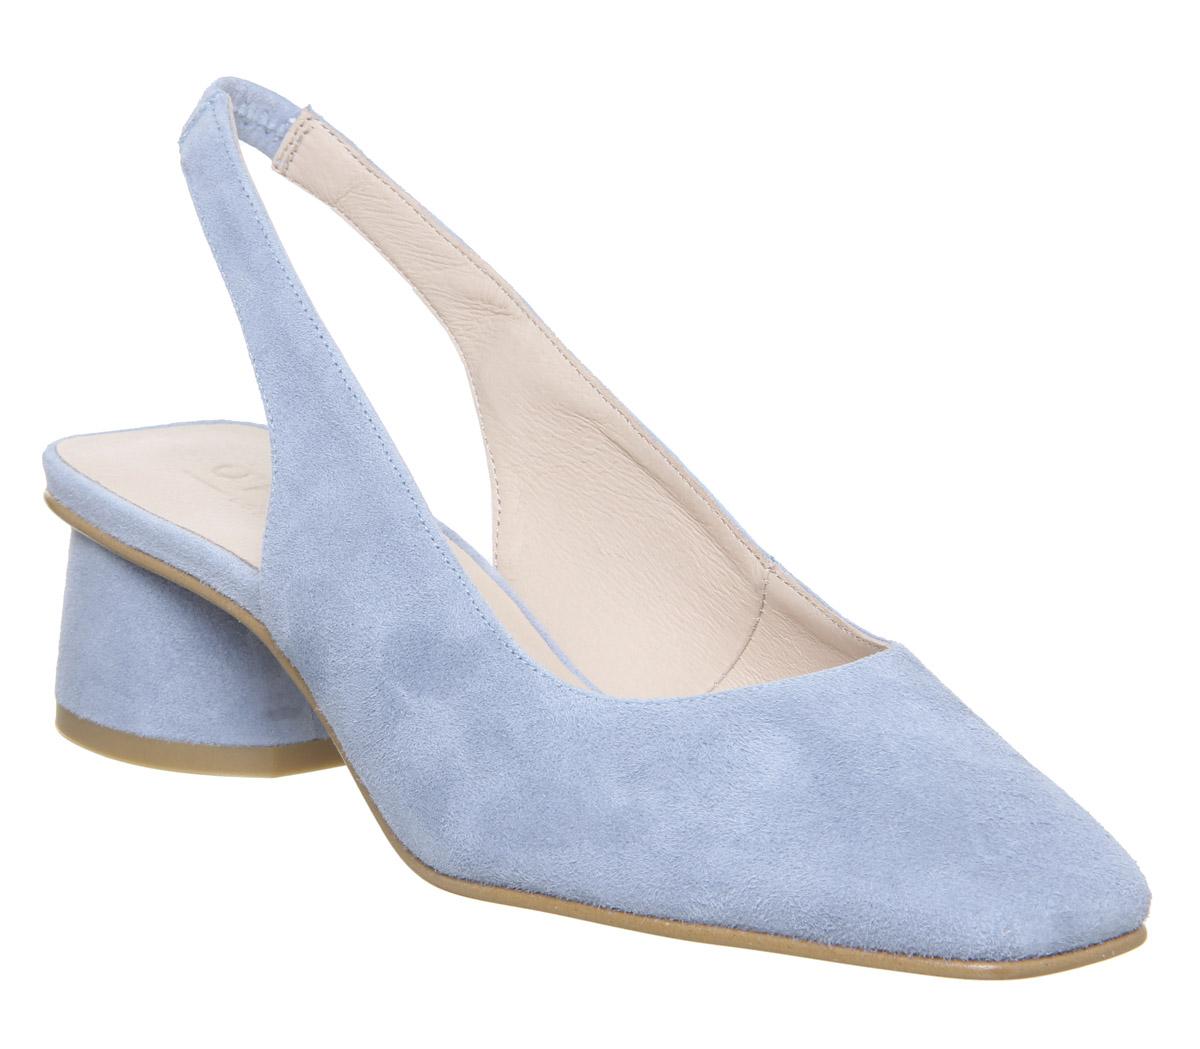 pale blue court shoes and matching bag